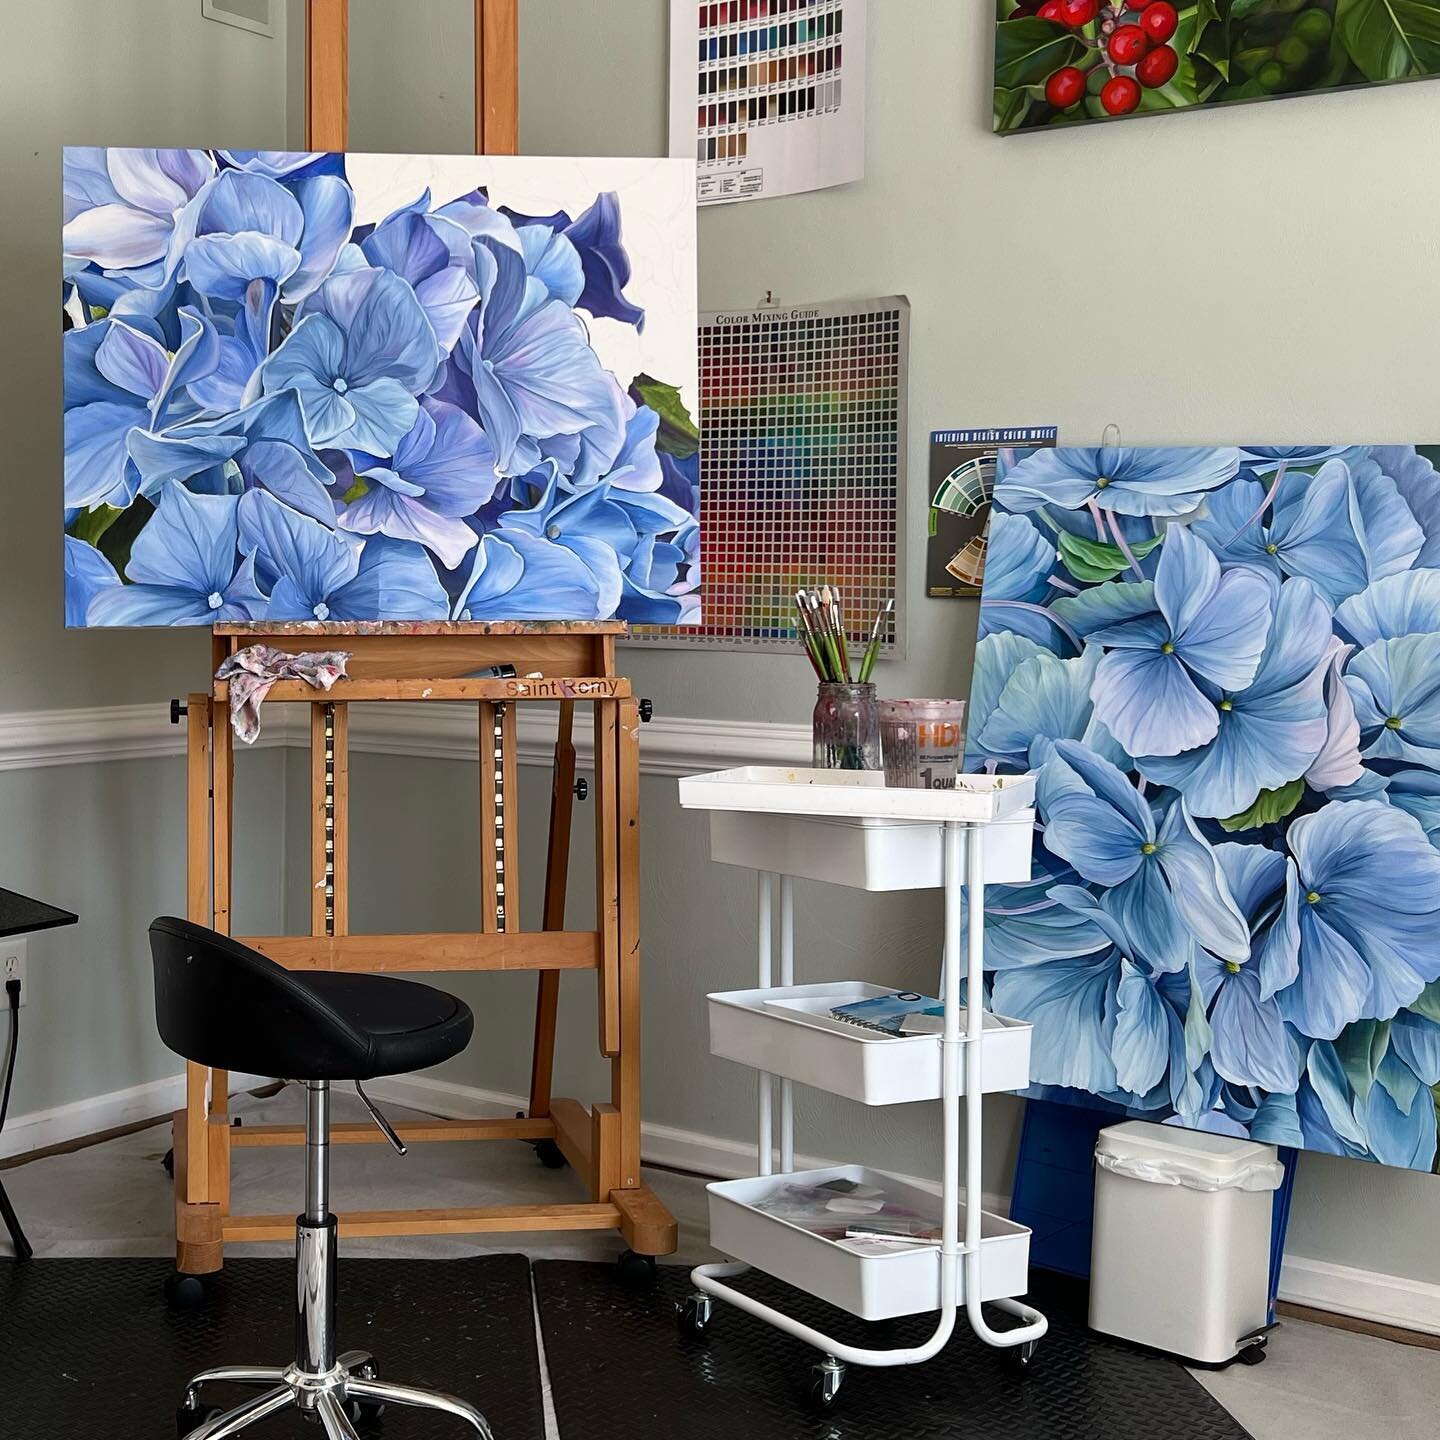 A new hydrangea painting in the works for Earth Day! My planted ones should be blooming soon. Every year they change slightly to a different color! What&rsquo;s ur favorite color hydrangea? #hydrangeaseason #bluehydrangeas #interiorart #artistsofinst